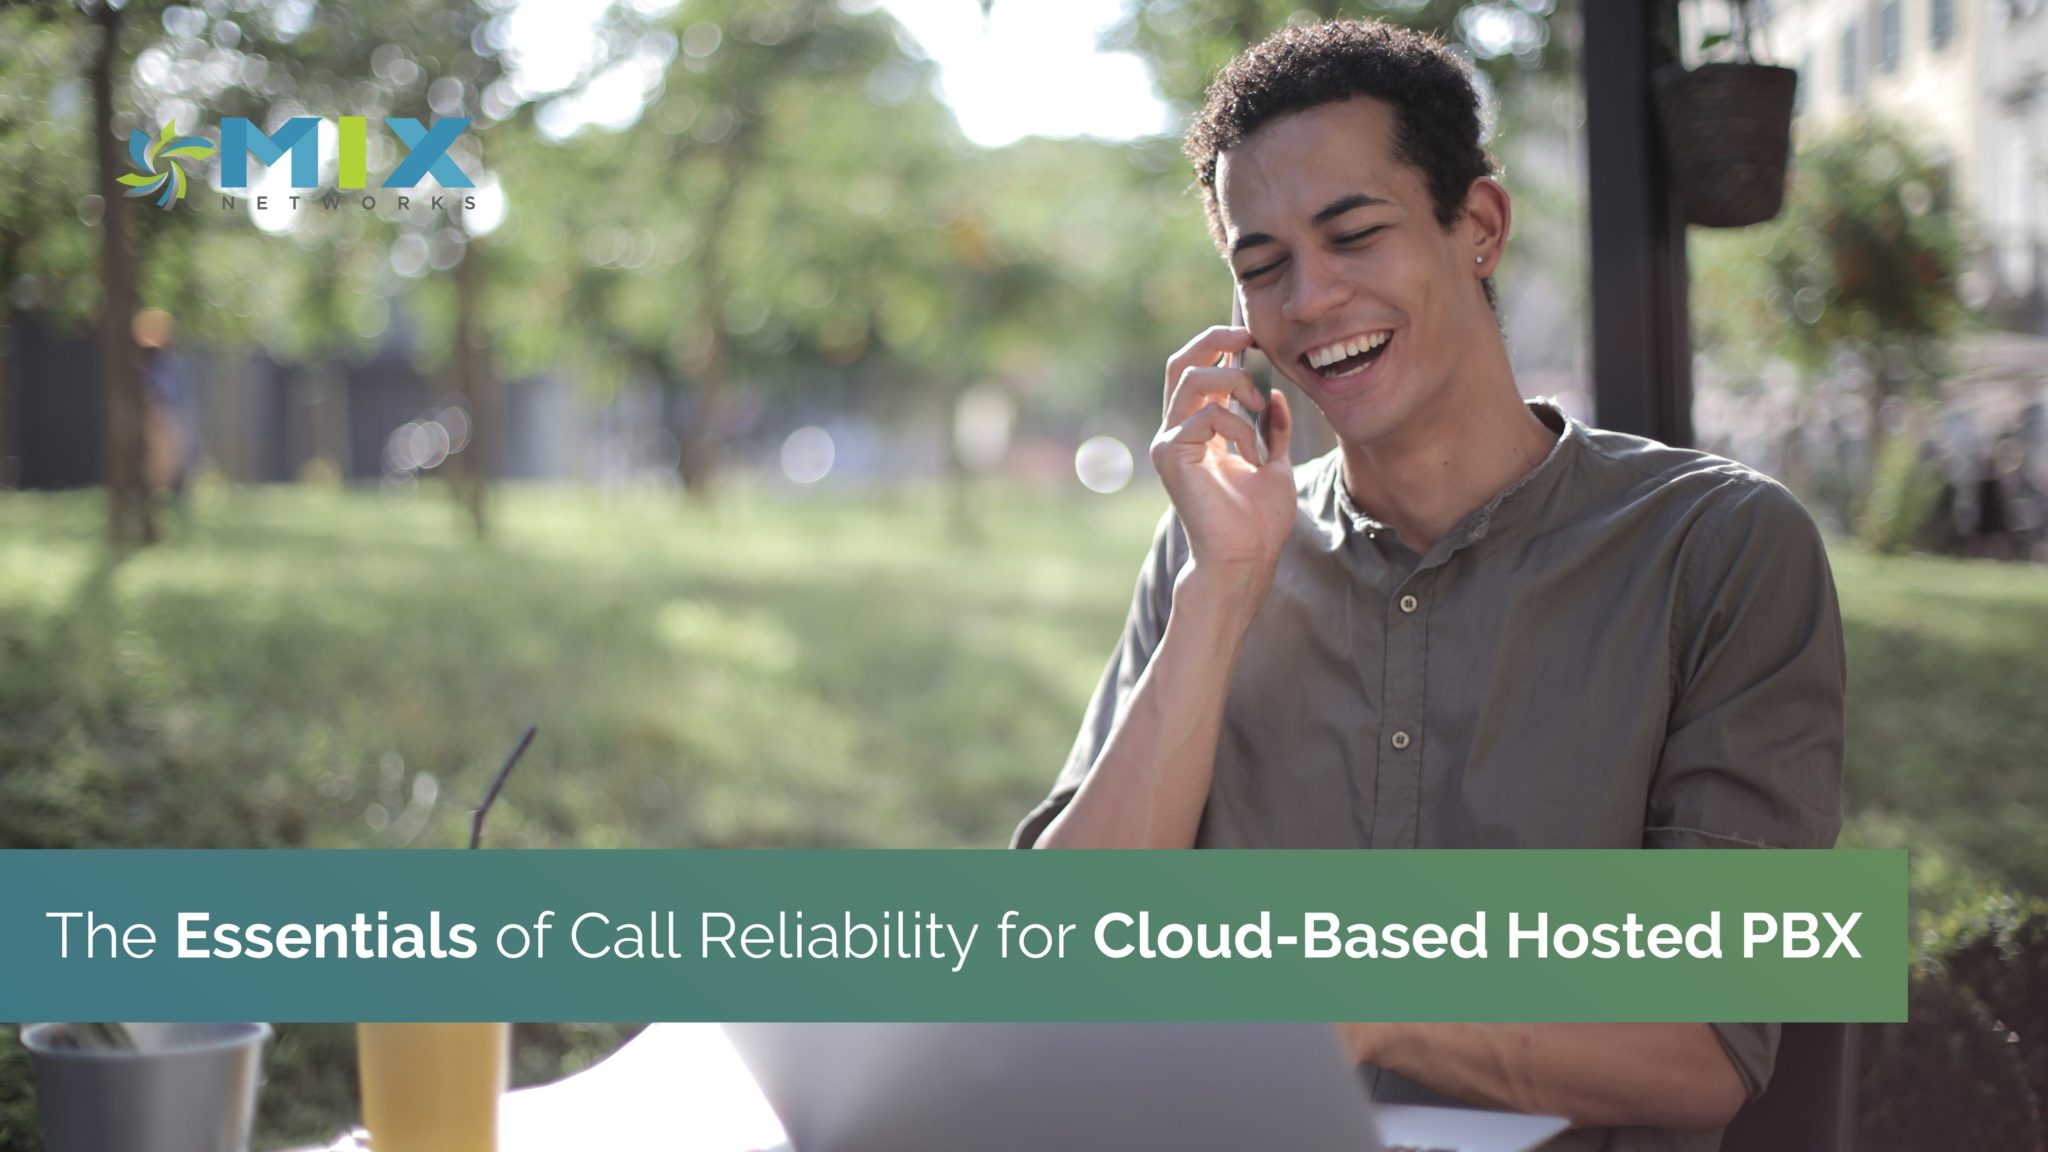 Essentials of Call Reliability for Cloud-Based Hosted PBX